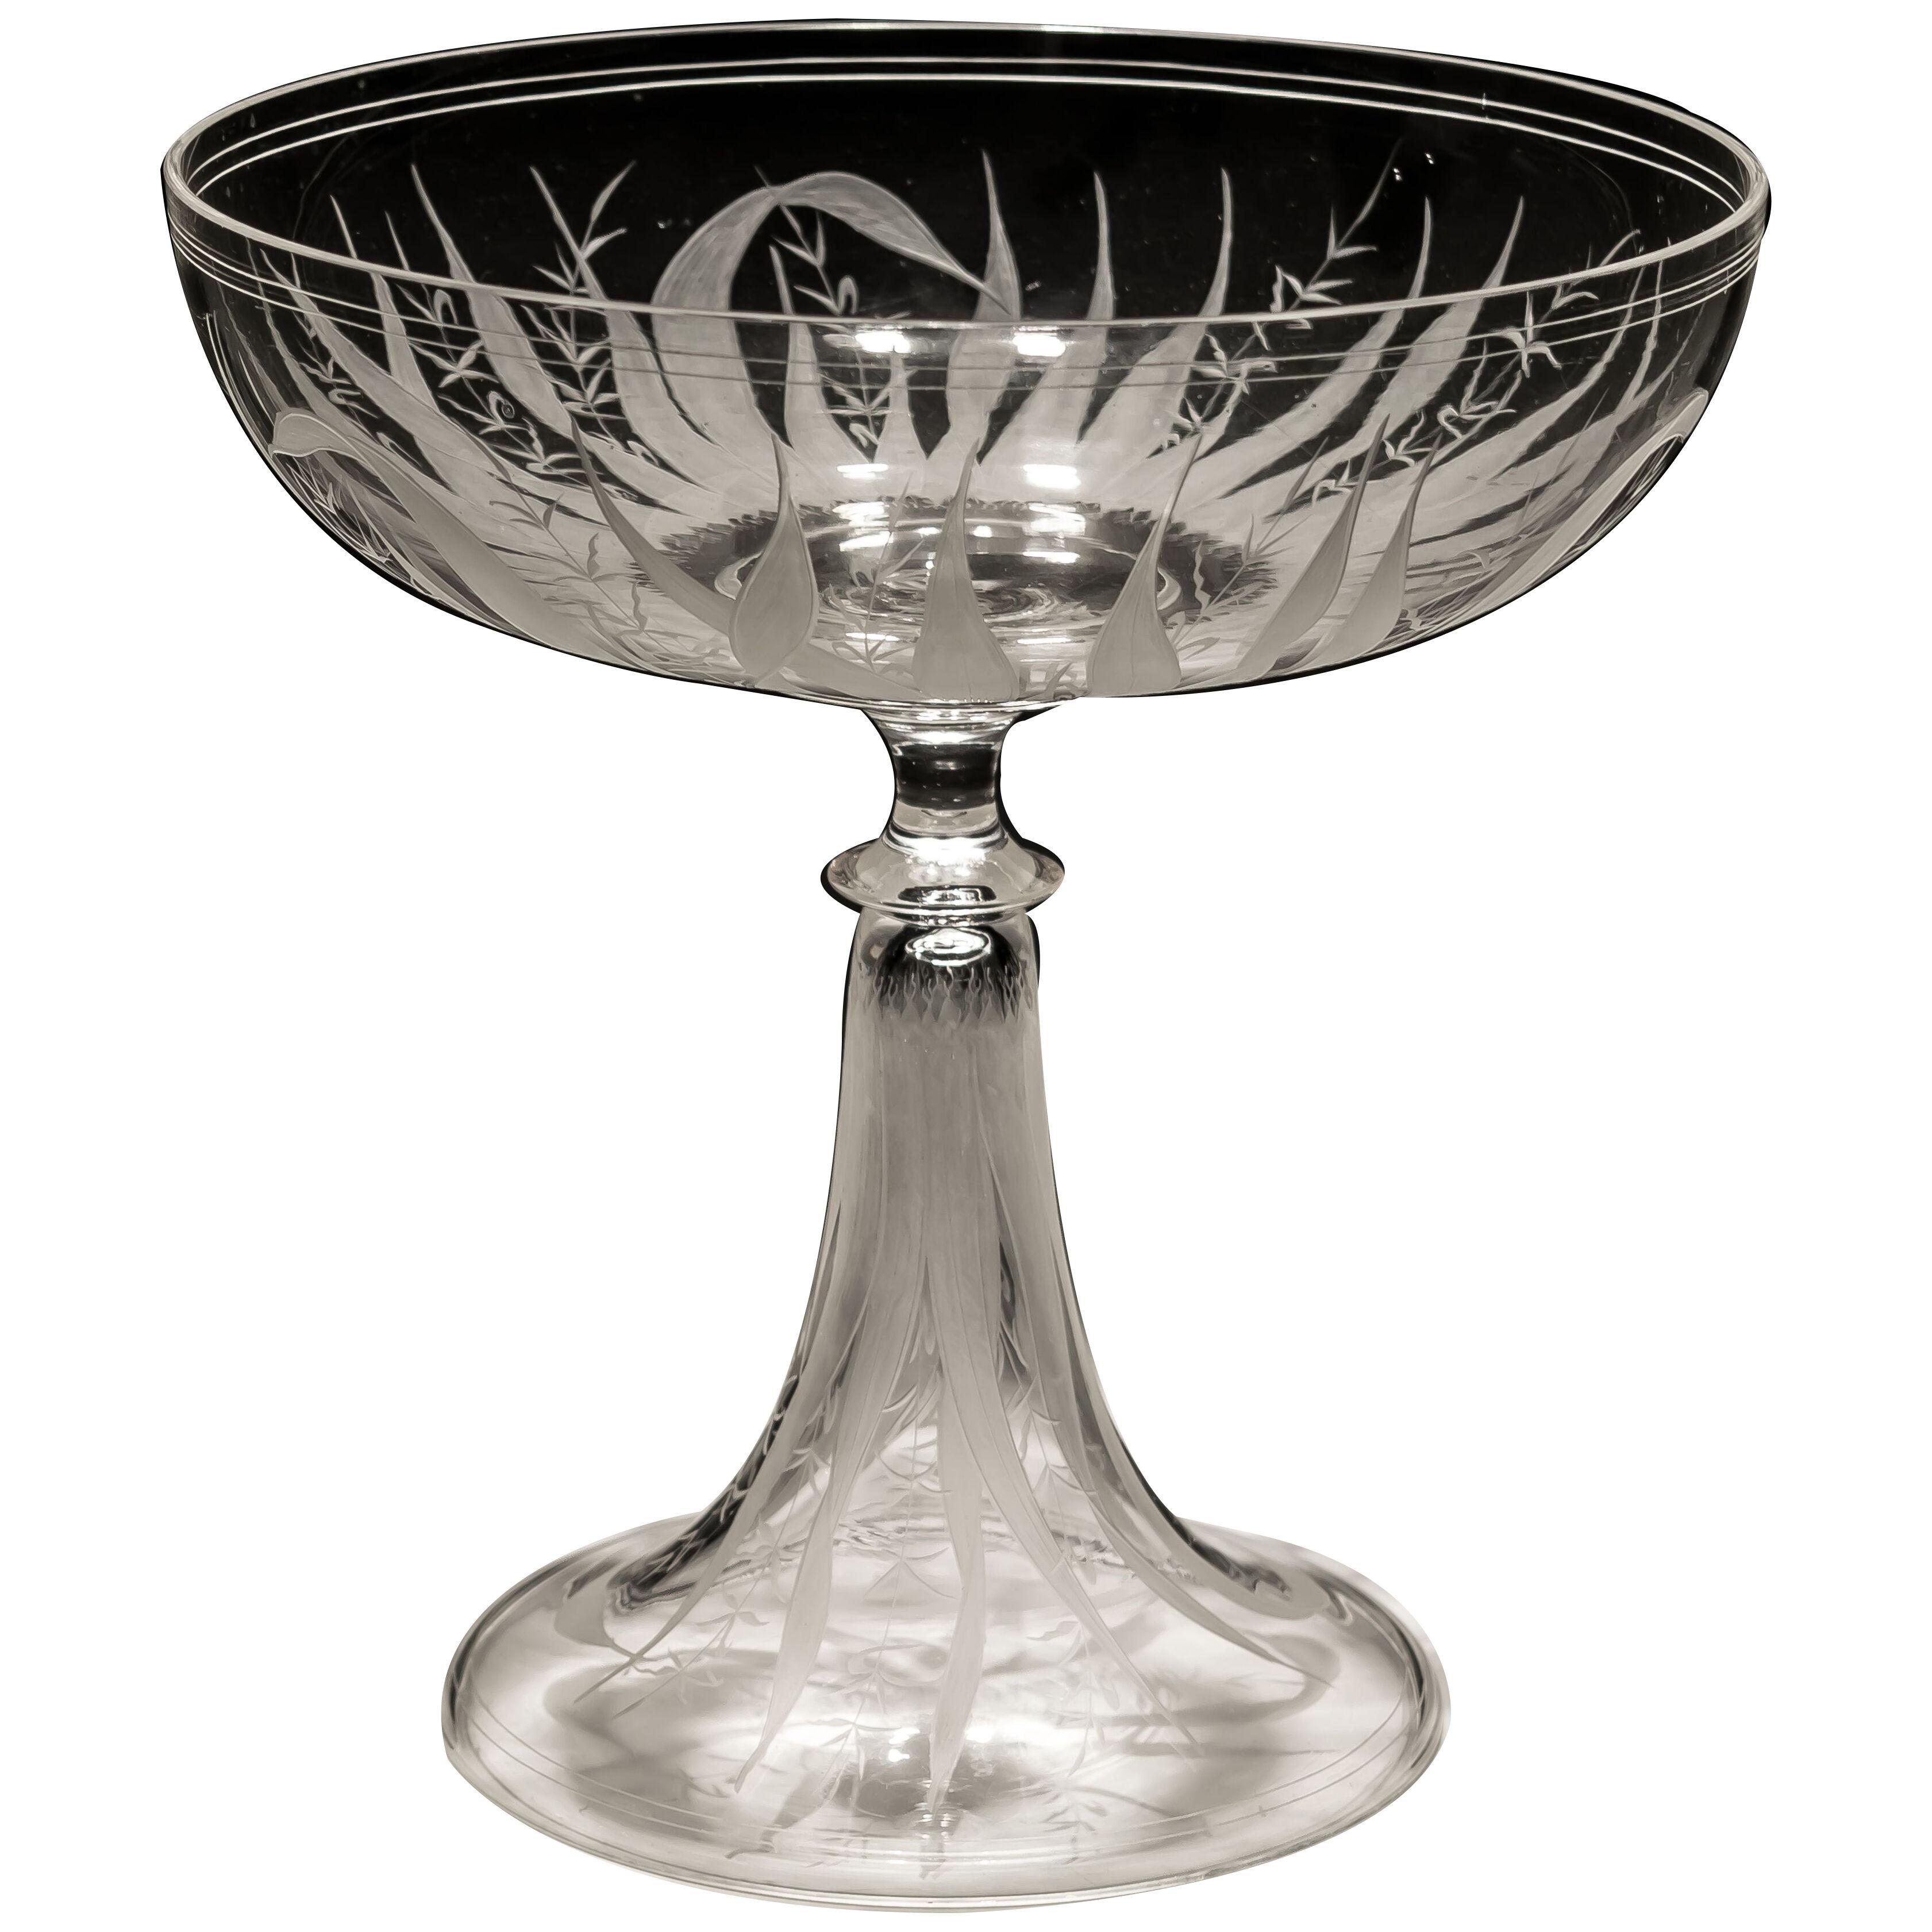 A Fineley Engraved Victorian Tazza